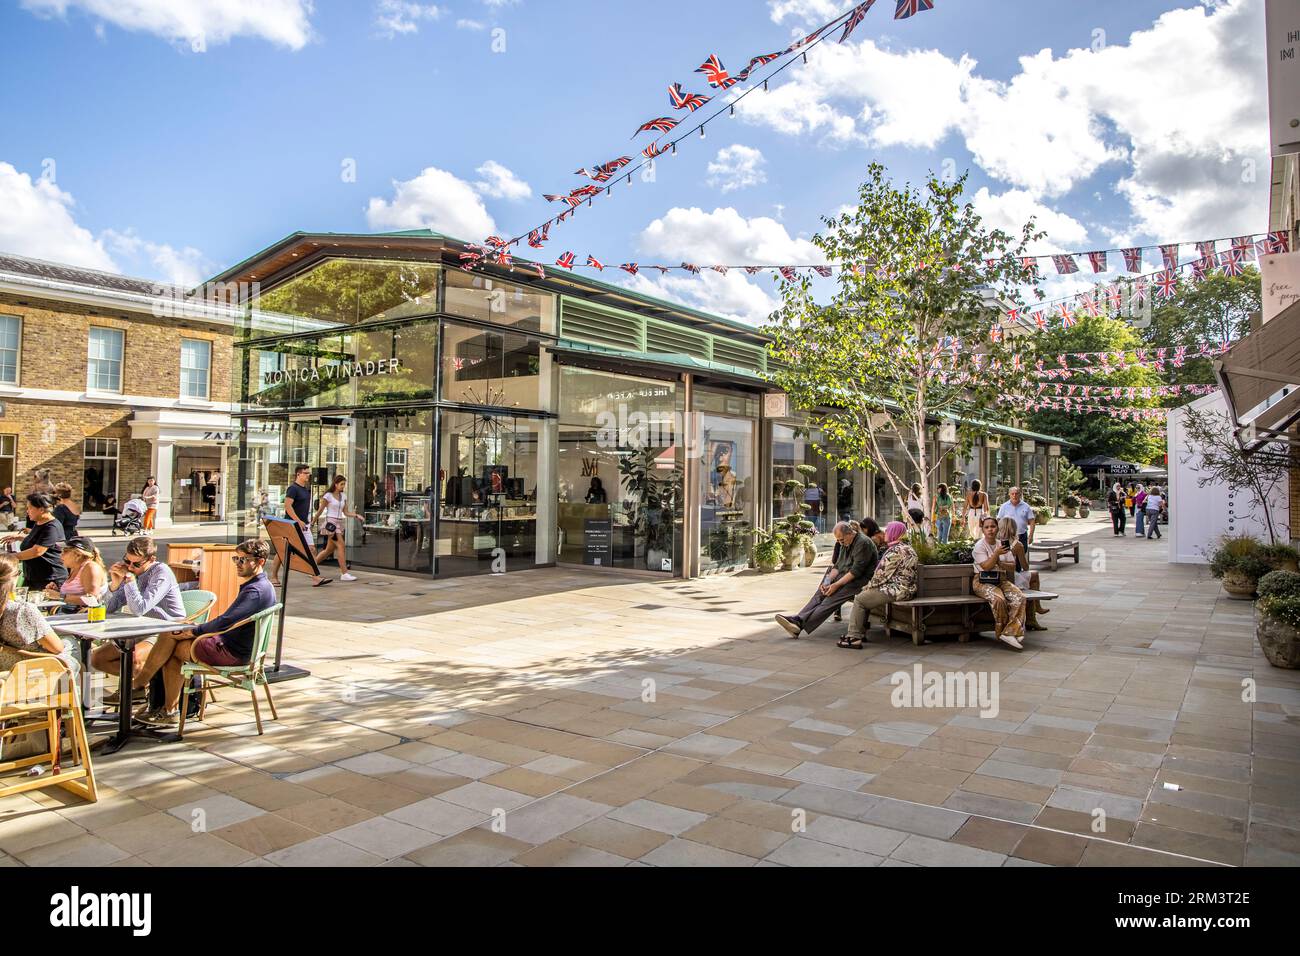 Duke of York Square. Stylish shopping hub offering high-end boutiques, restaurants with outdoor tables & an art gallery. Stock Photo